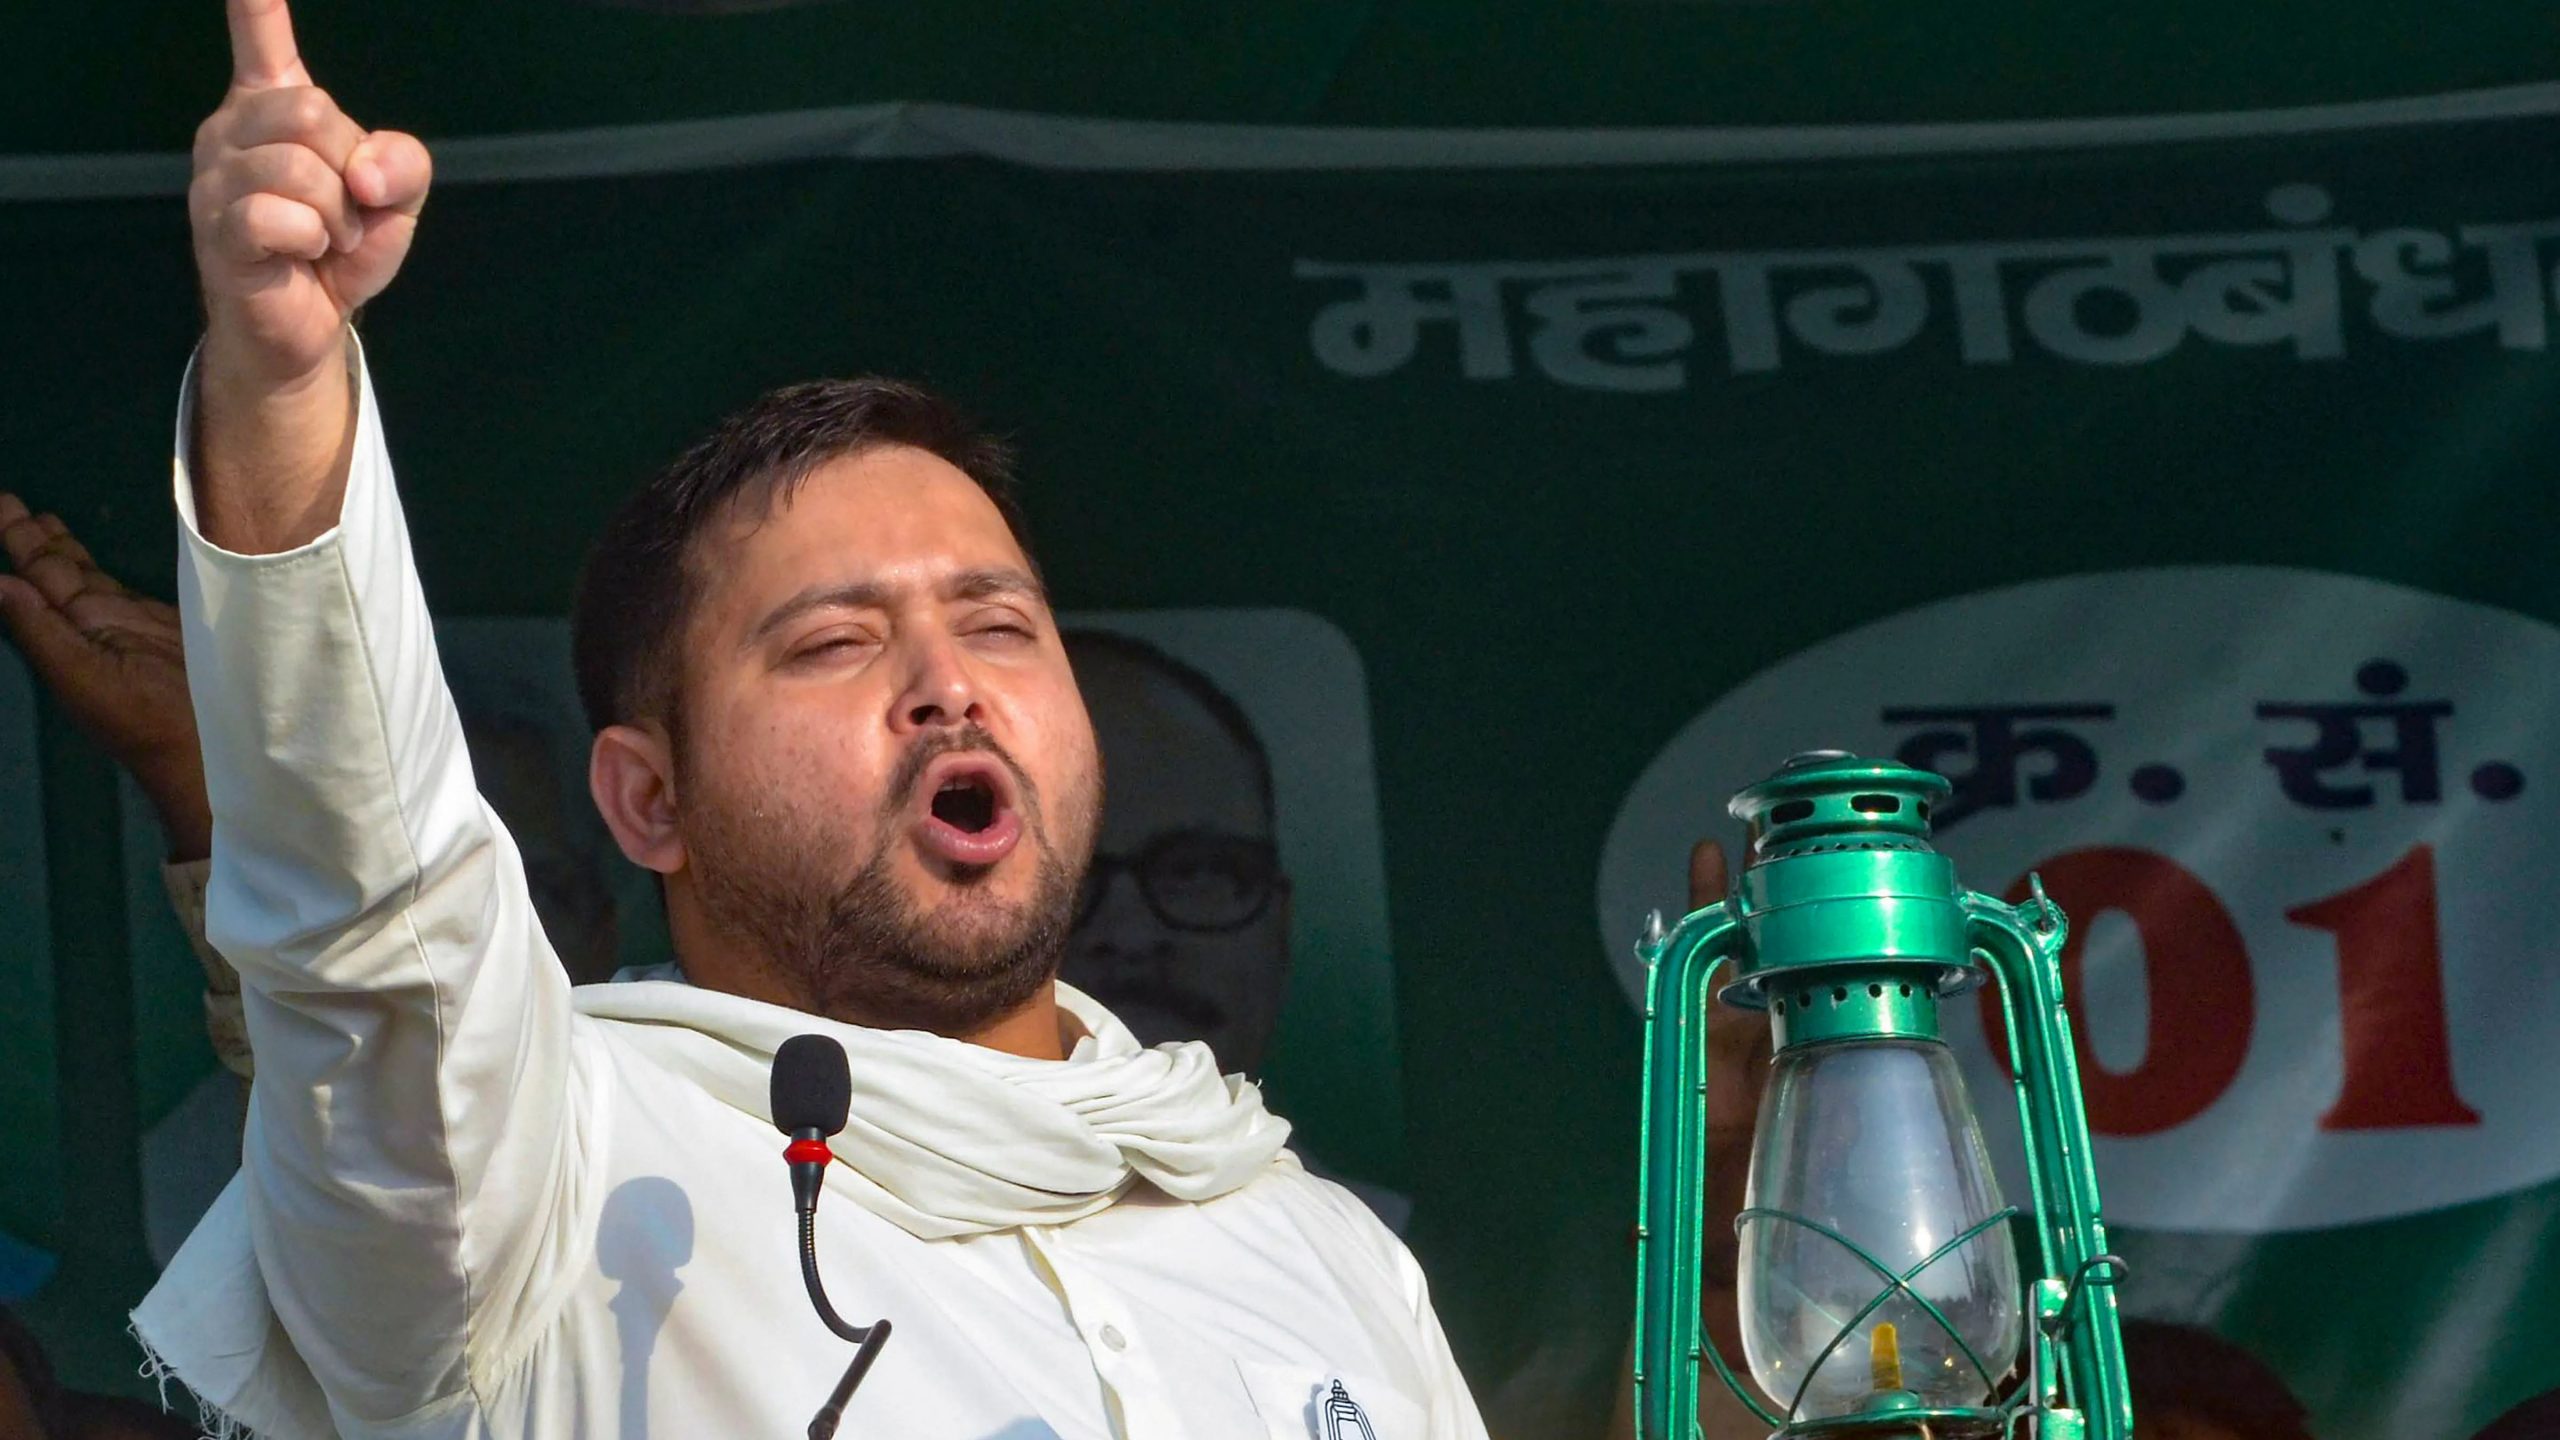 ‘They are caught in the past, I think about present and future’: Tejashwi on ‘yuvraj’ barb